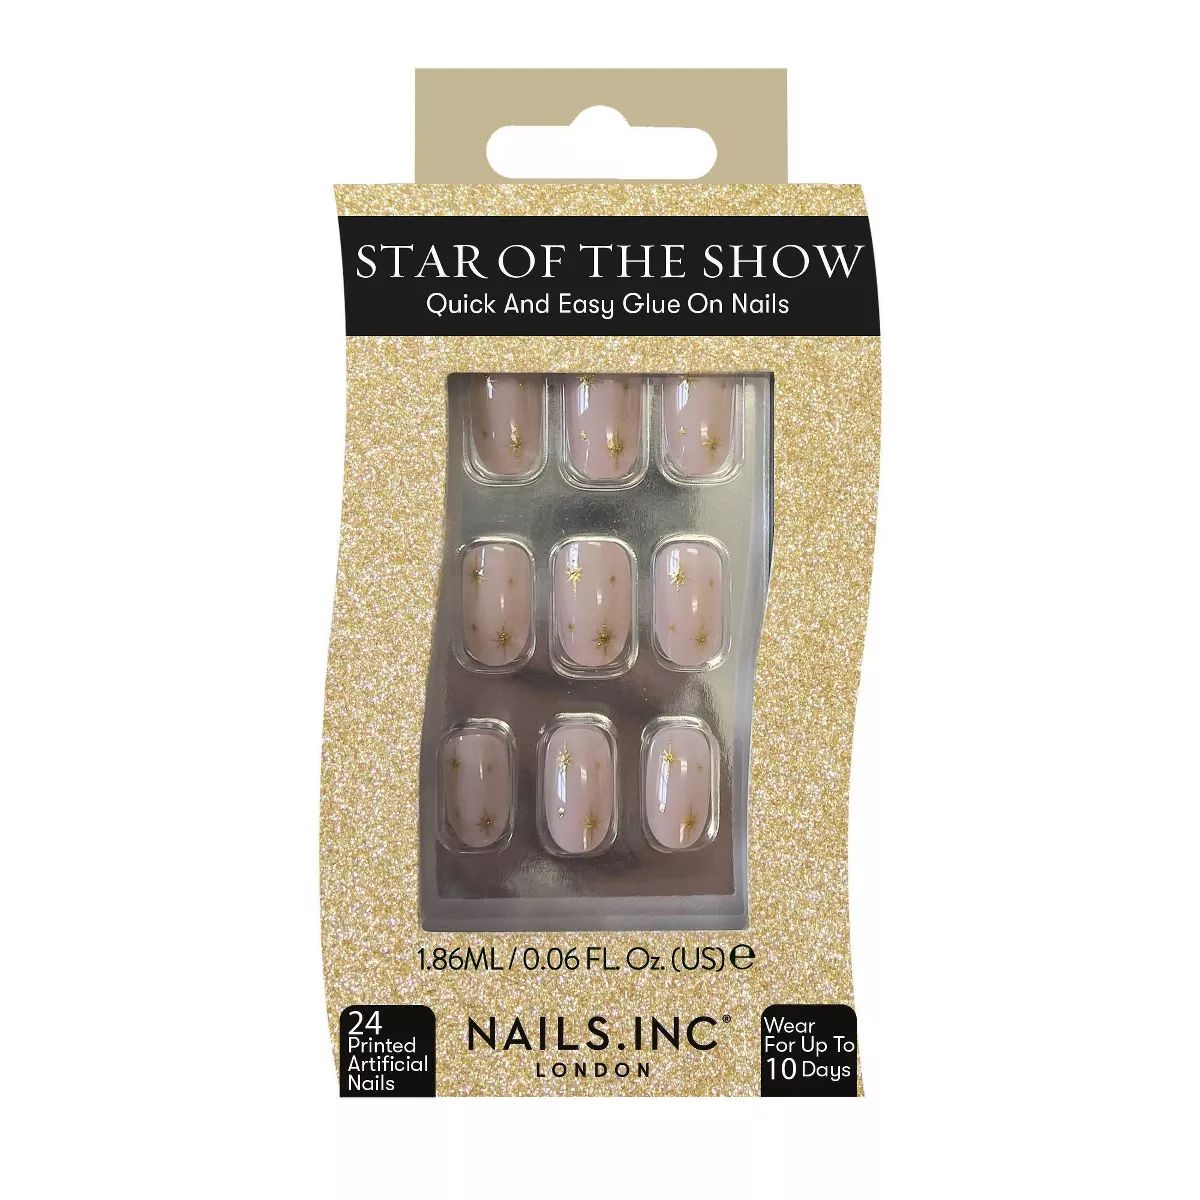 Nails Inc. Fake Nails - Star of the Show Gold Star - 24ct | Target